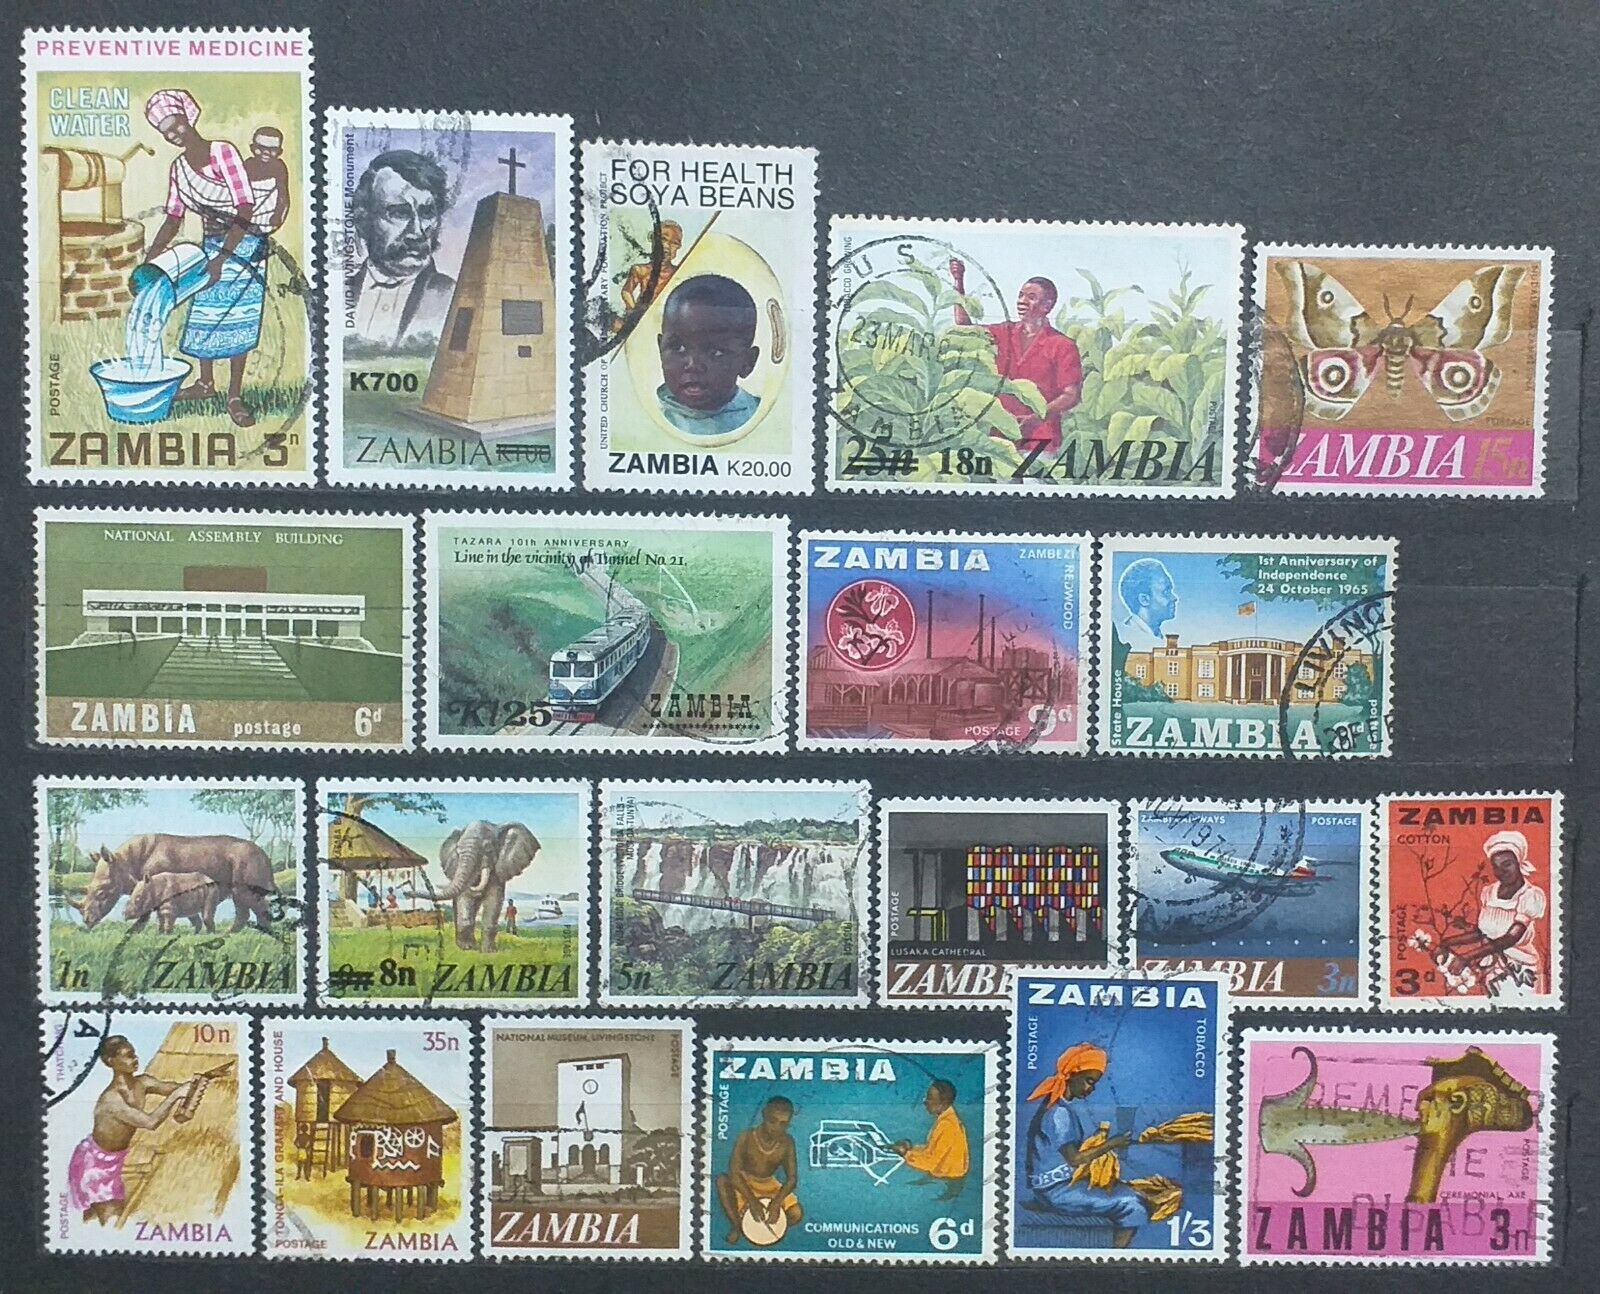 Zambia Stamps Collection - 21 Used Stamps